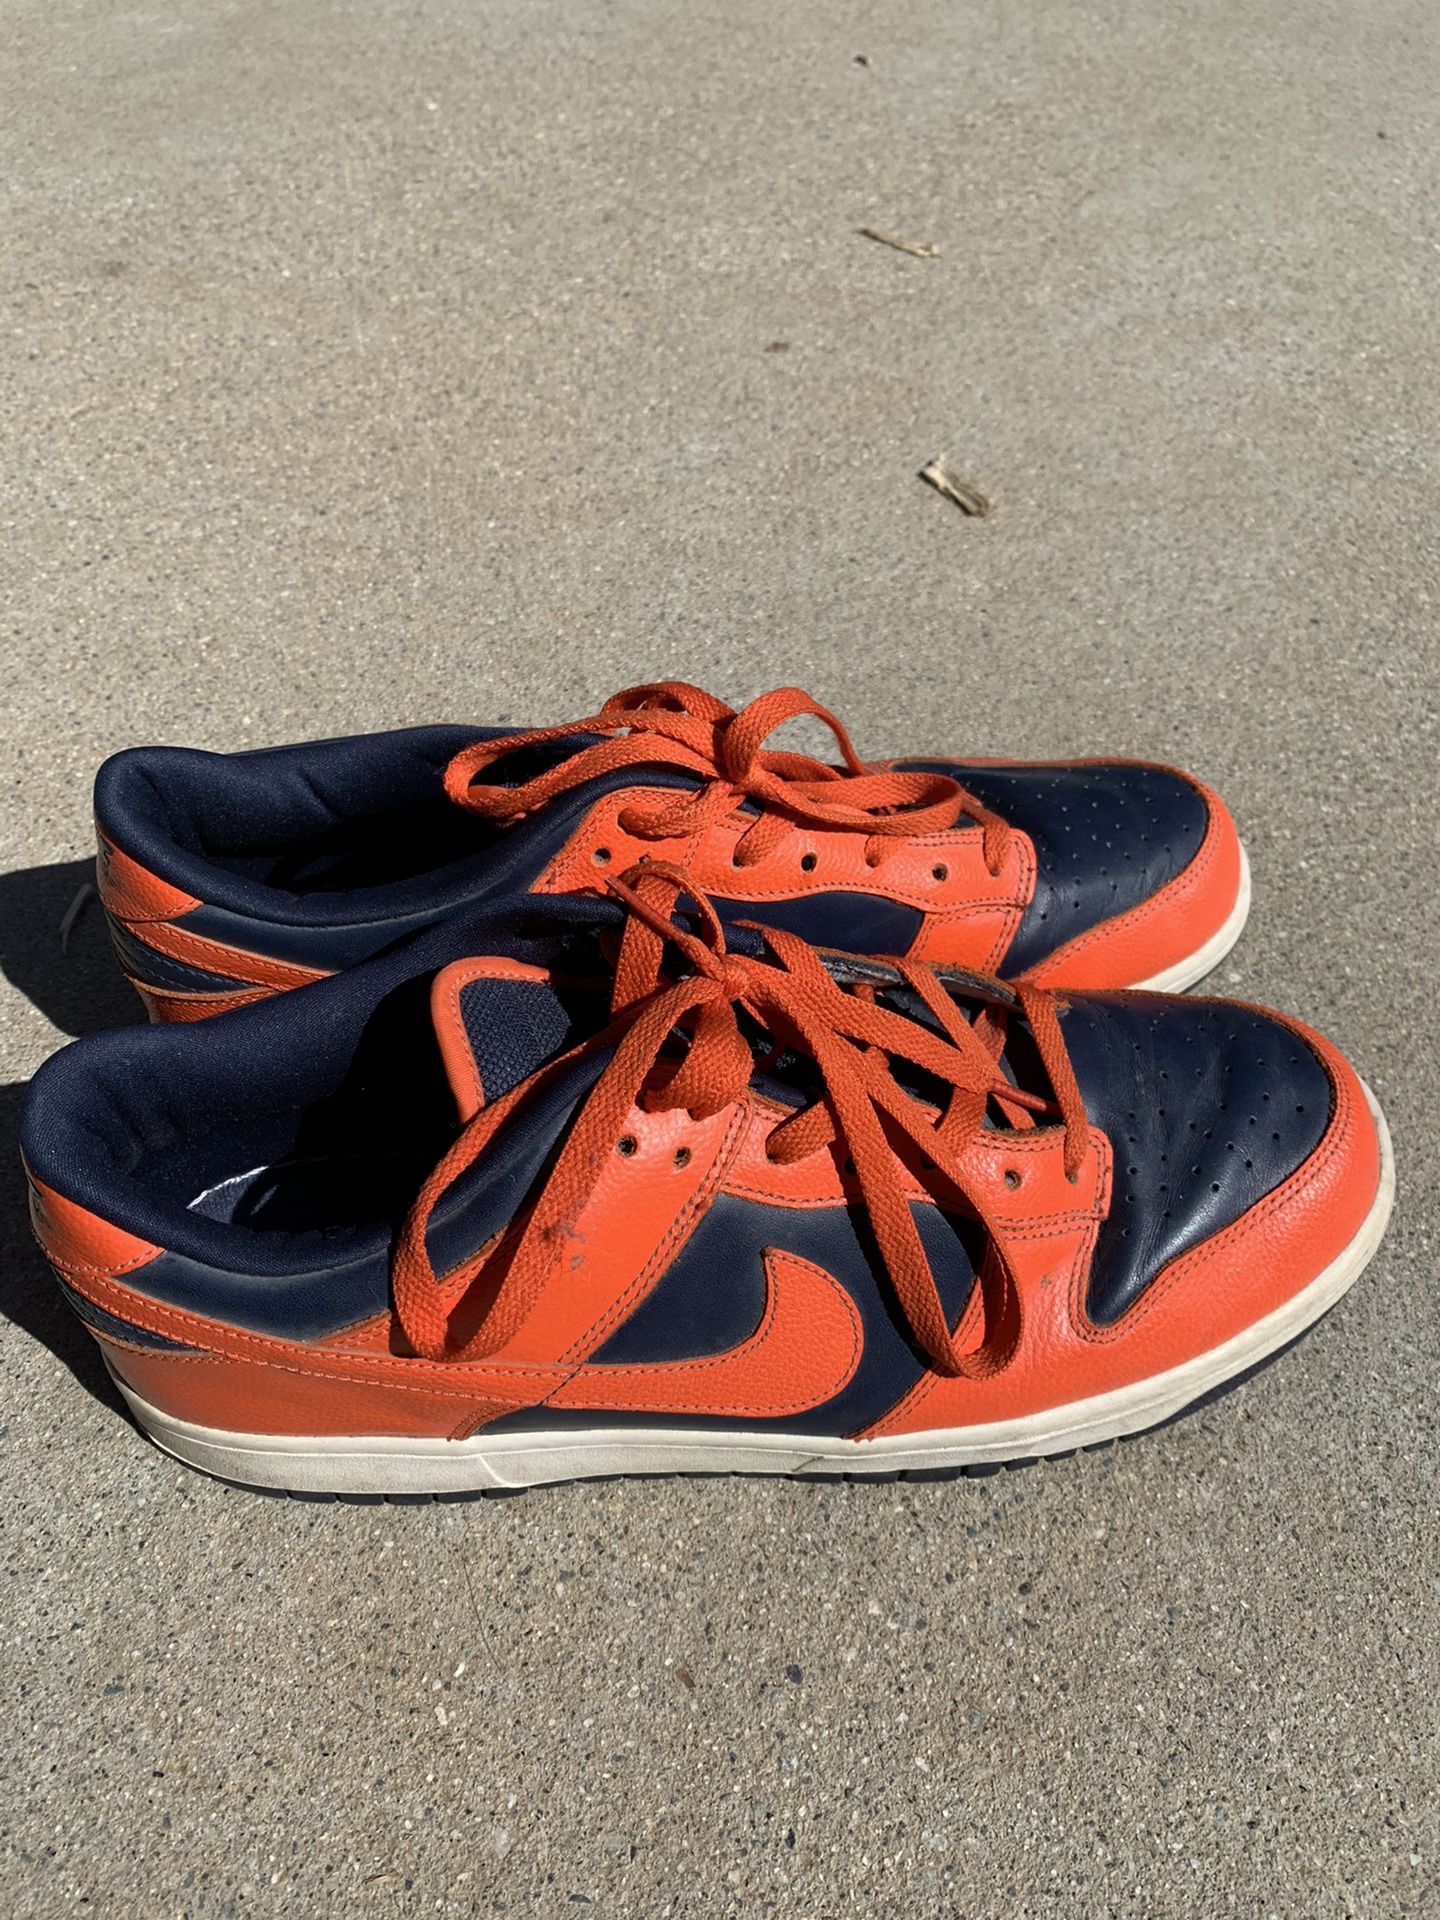 used men’s size 12 nike shoes